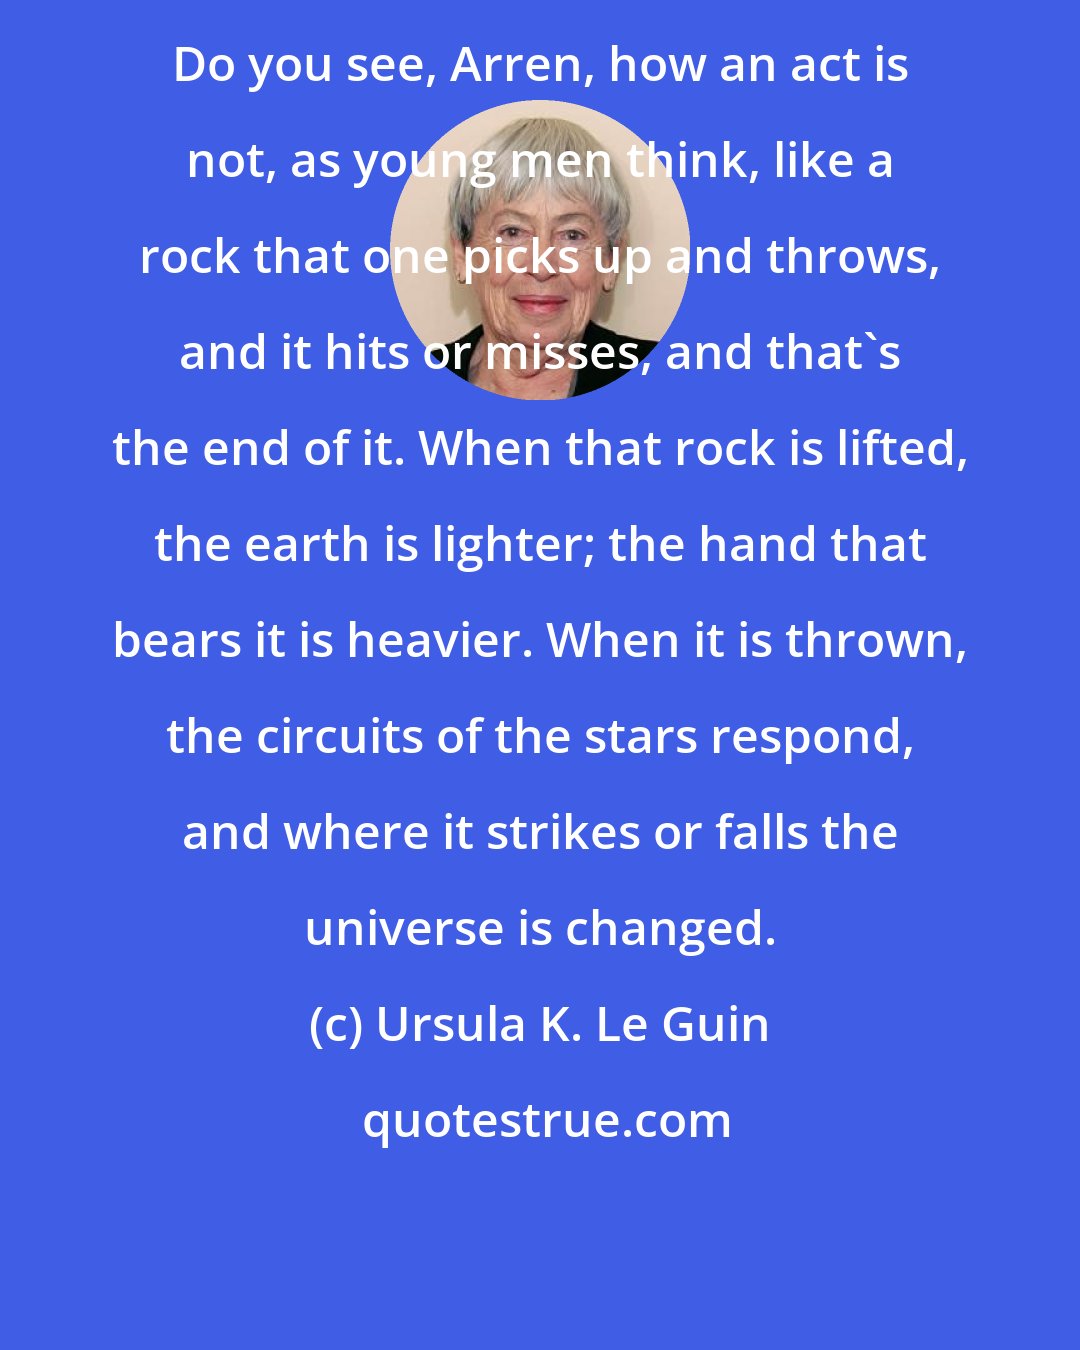 Ursula K. Le Guin: Do you see, Arren, how an act is not, as young men think, like a rock that one picks up and throws, and it hits or misses, and that's the end of it. When that rock is lifted, the earth is lighter; the hand that bears it is heavier. When it is thrown, the circuits of the stars respond, and where it strikes or falls the universe is changed.